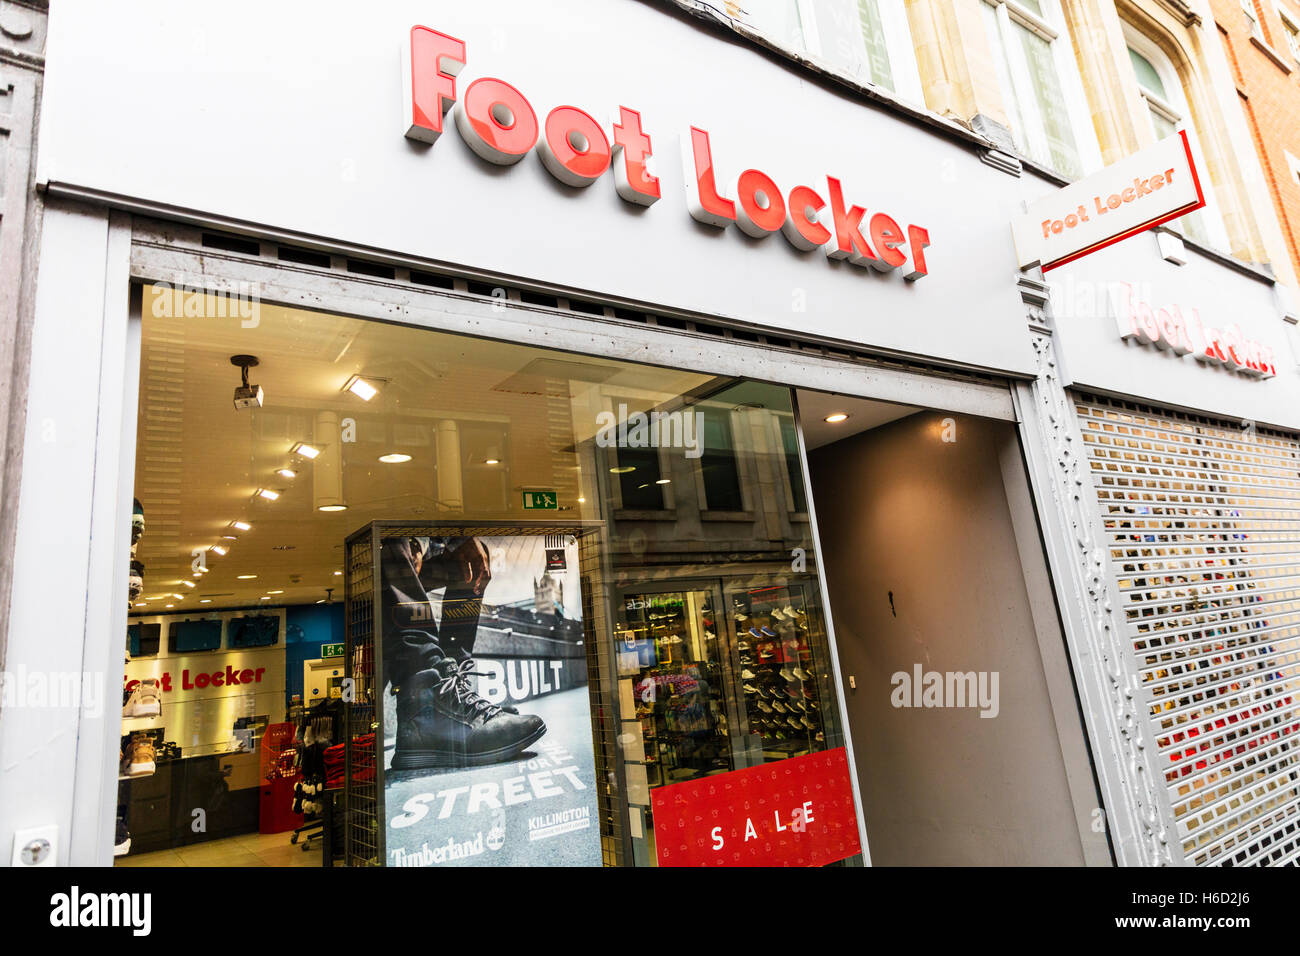 Foot locker store shop front sign exterior high street chain store shoe shop signs window sale display UK England GB Stock Photo